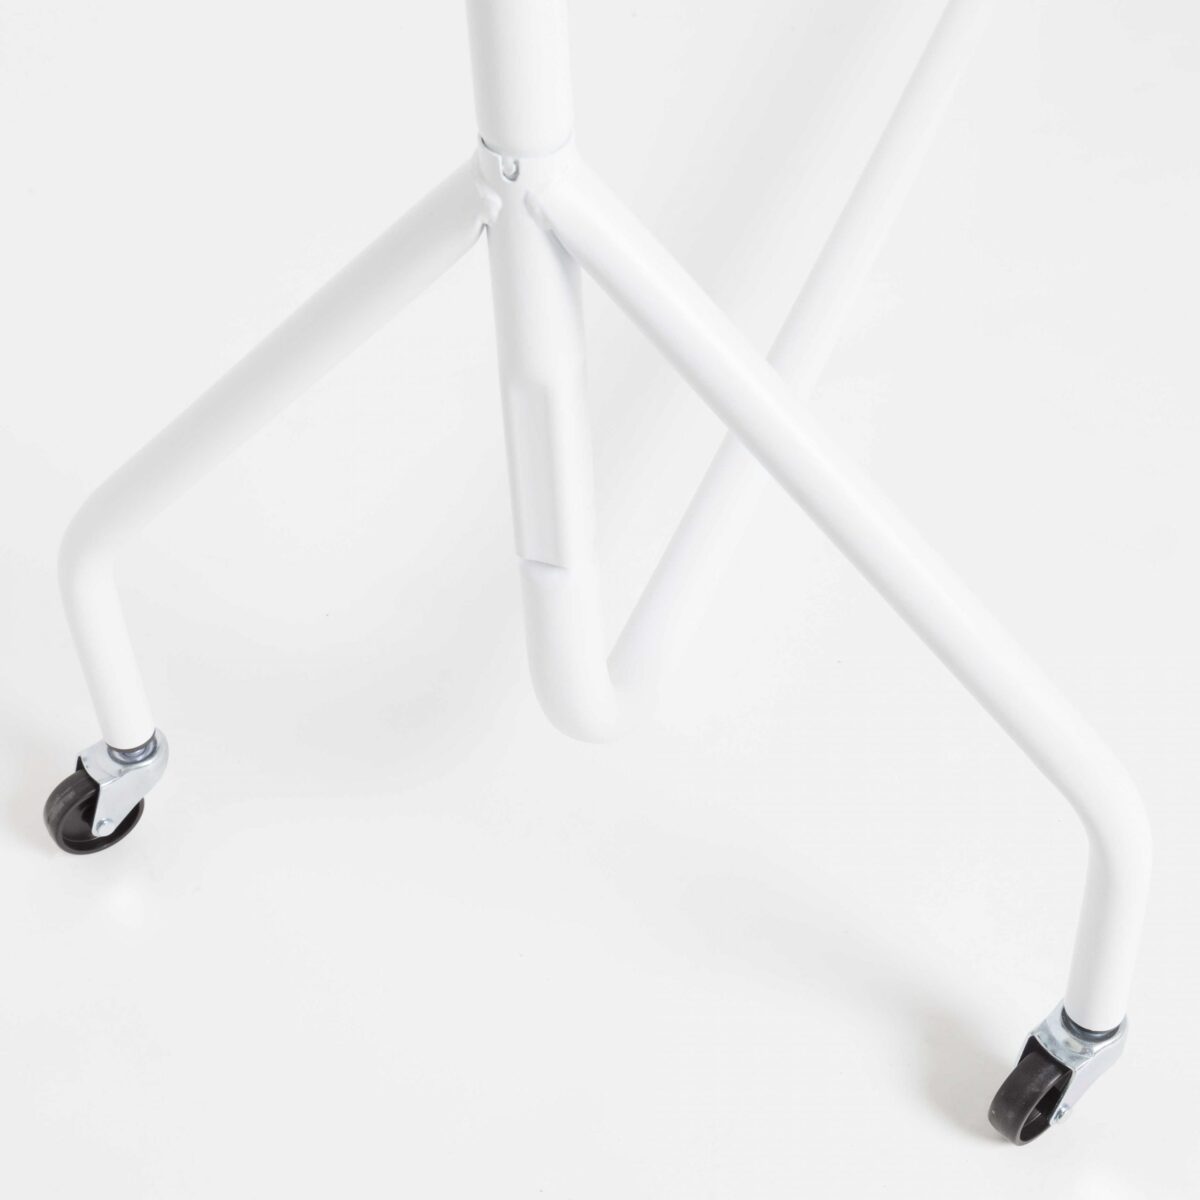 White Clothes Rail With Wheels (3-6 ft Long)